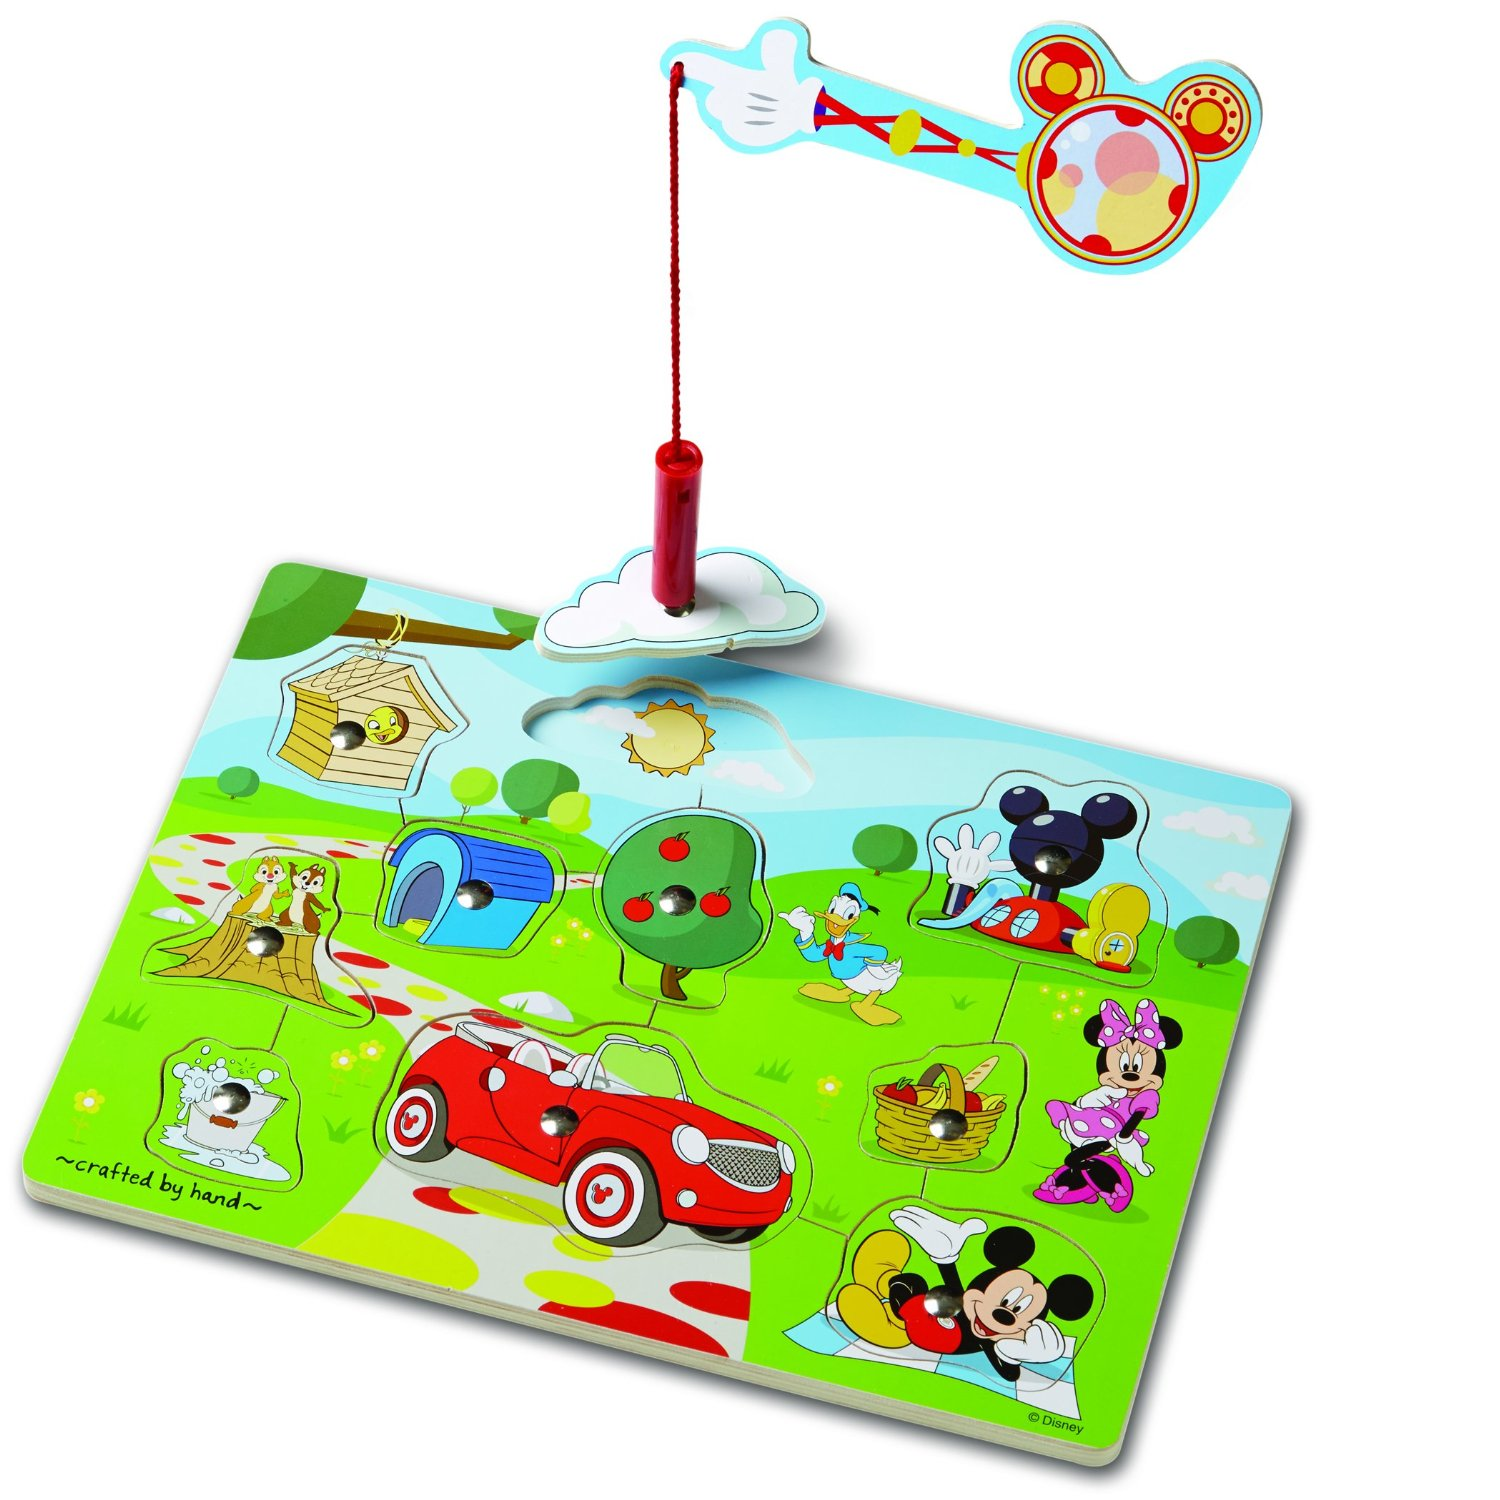 Mickey Mouse Clubhouse Hide & Seek Wooden Magnetic Game Just $6.99 on Amazon! (Add-On Item)